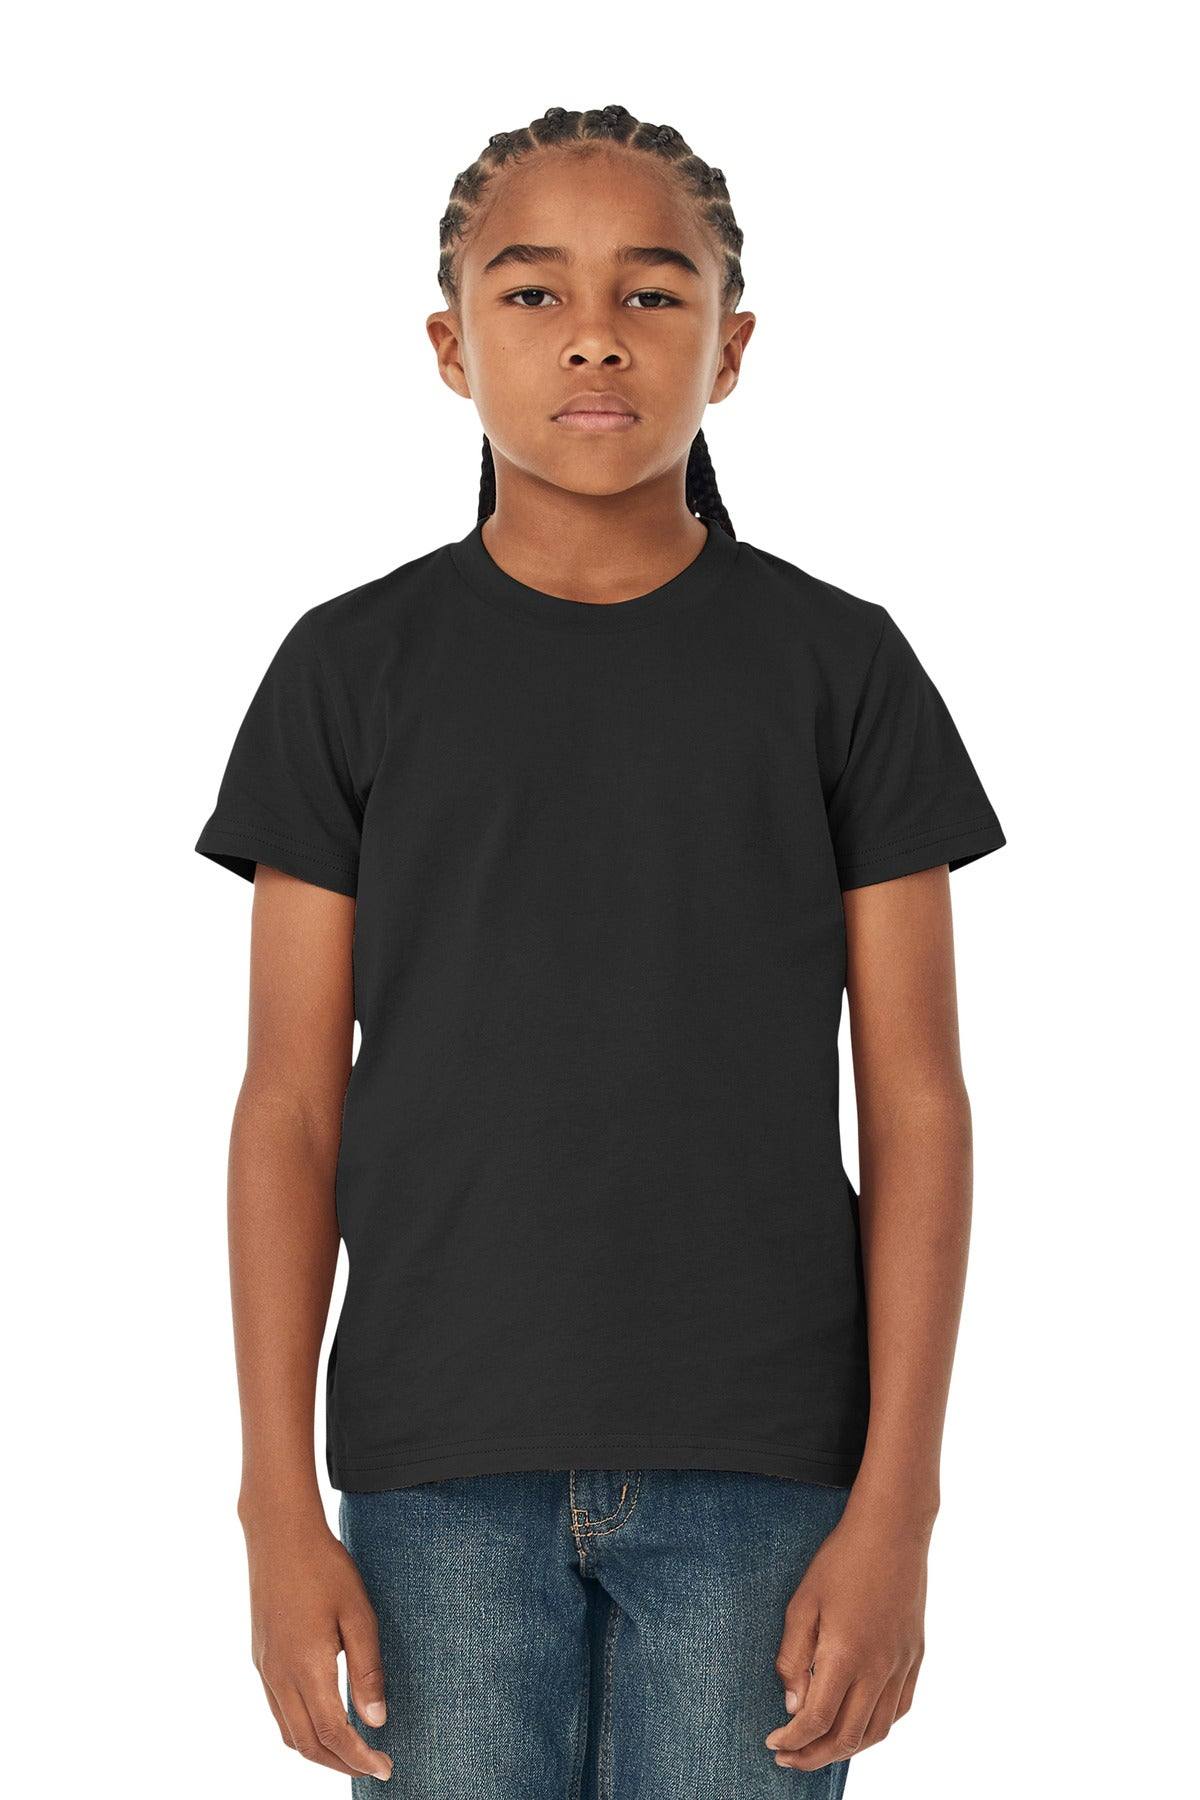 Bella and Canva Youth Sizing Chart, BC3001Y Sizing Chart, Kids Sizing  Chart, Kids T-shirt Mockup